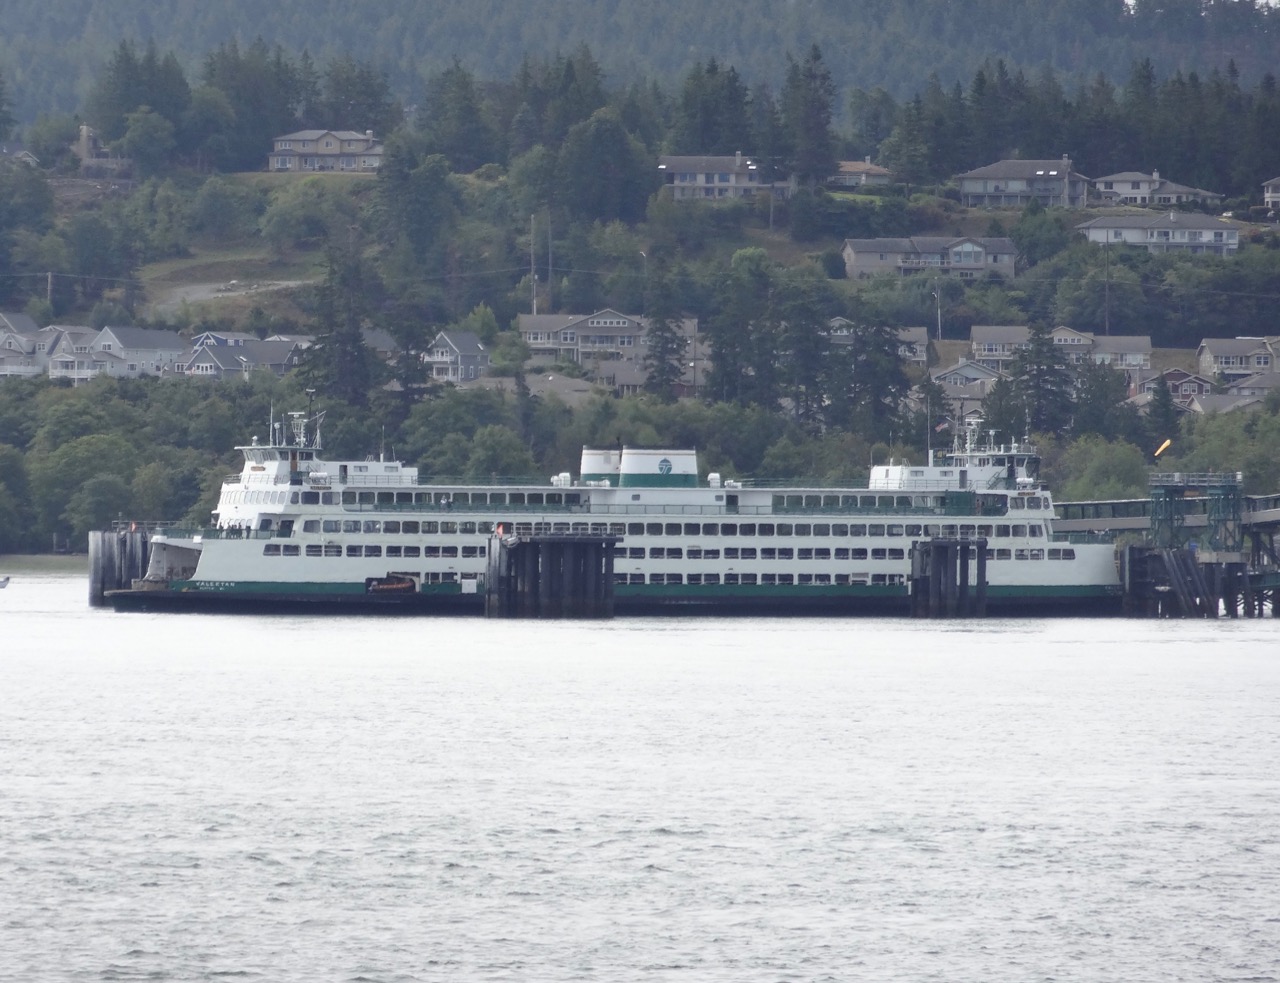 Approaching the Anacortes Ferry Landing